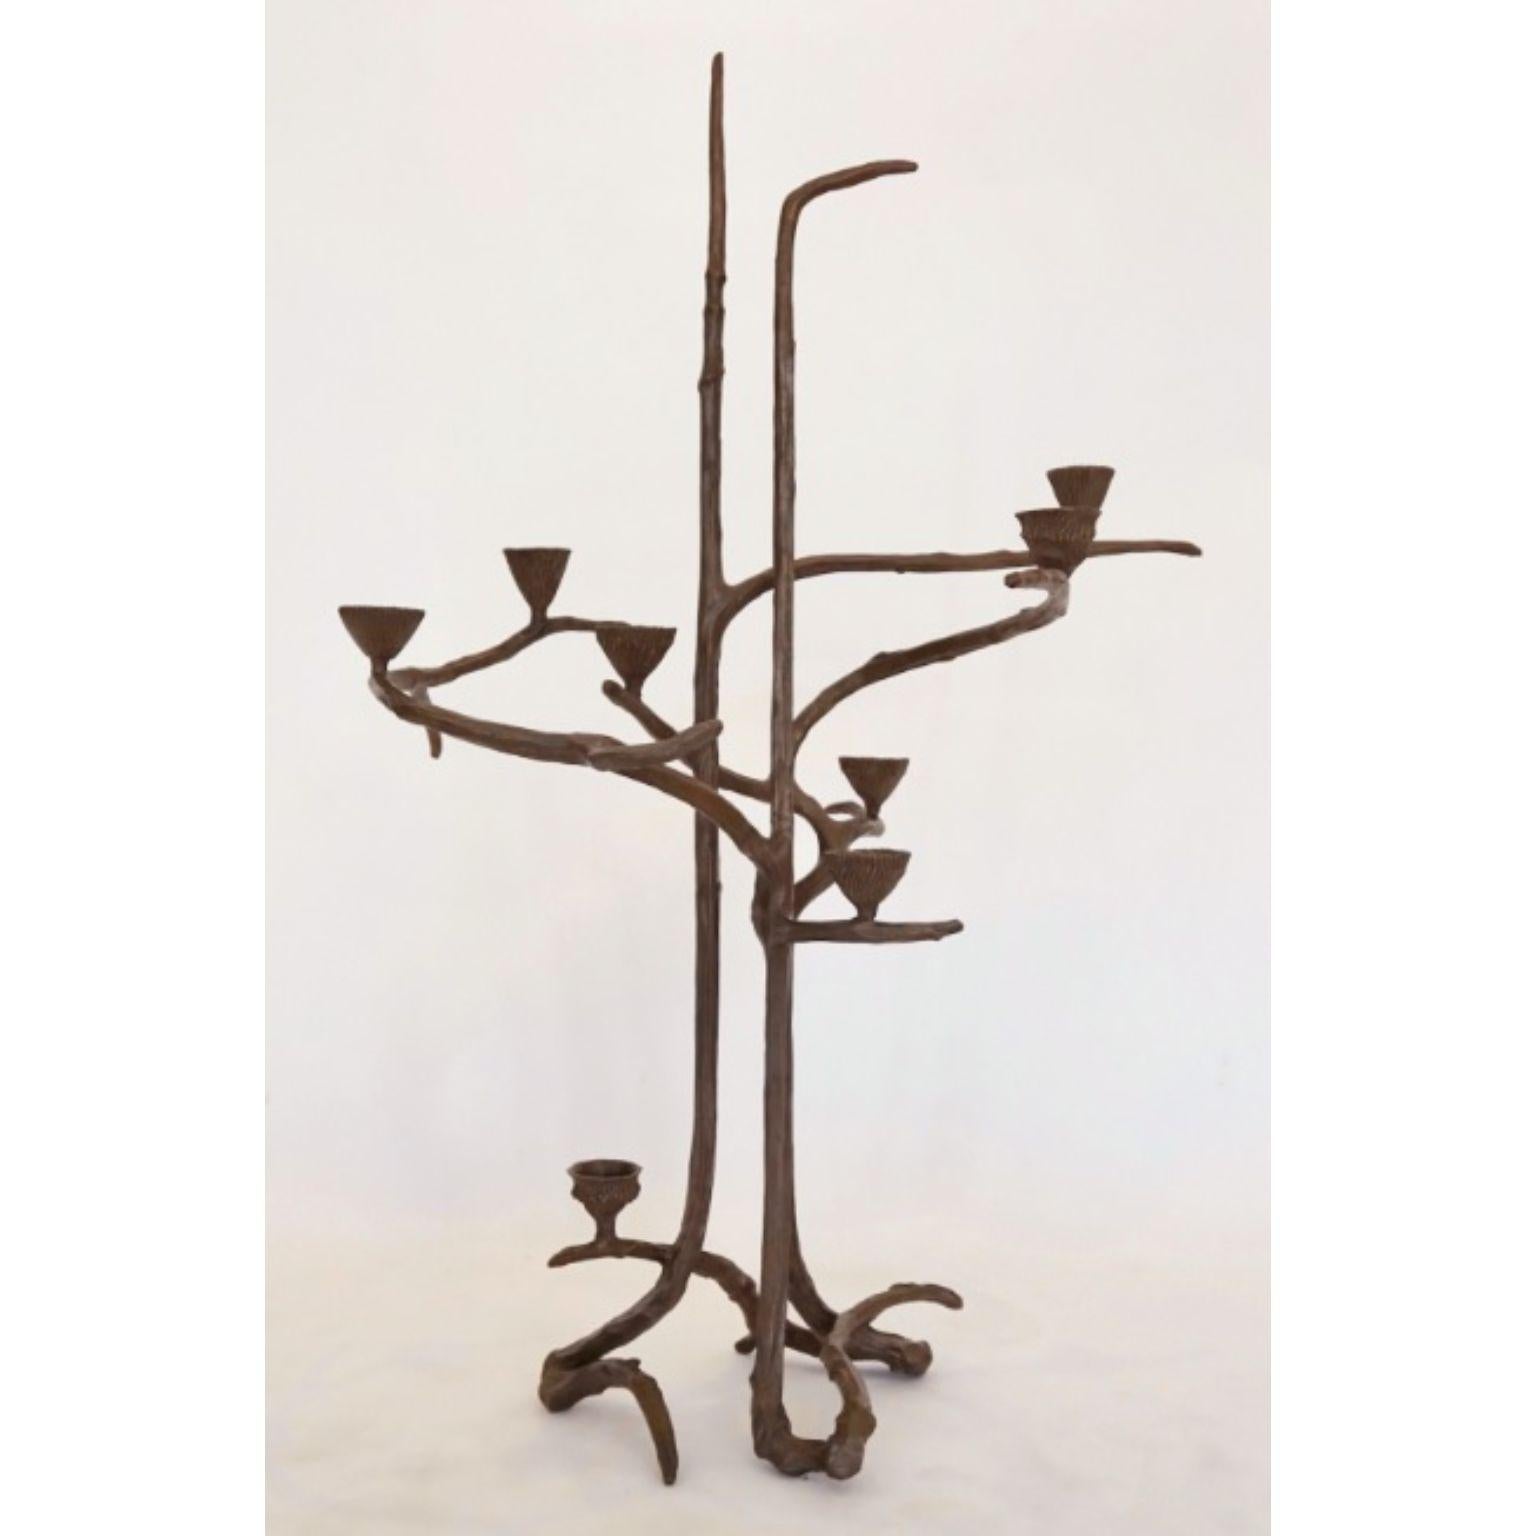 Bronze Candelabra by Mary Brogger
Dimensions: W 61 cm x D 71 cm x H 104 cm.
Materials: Bronze with Silver Nitrate Patina.
Also available in other finishes and dimensions.

Mary Brogger is an internationally recognized artist whose diverse